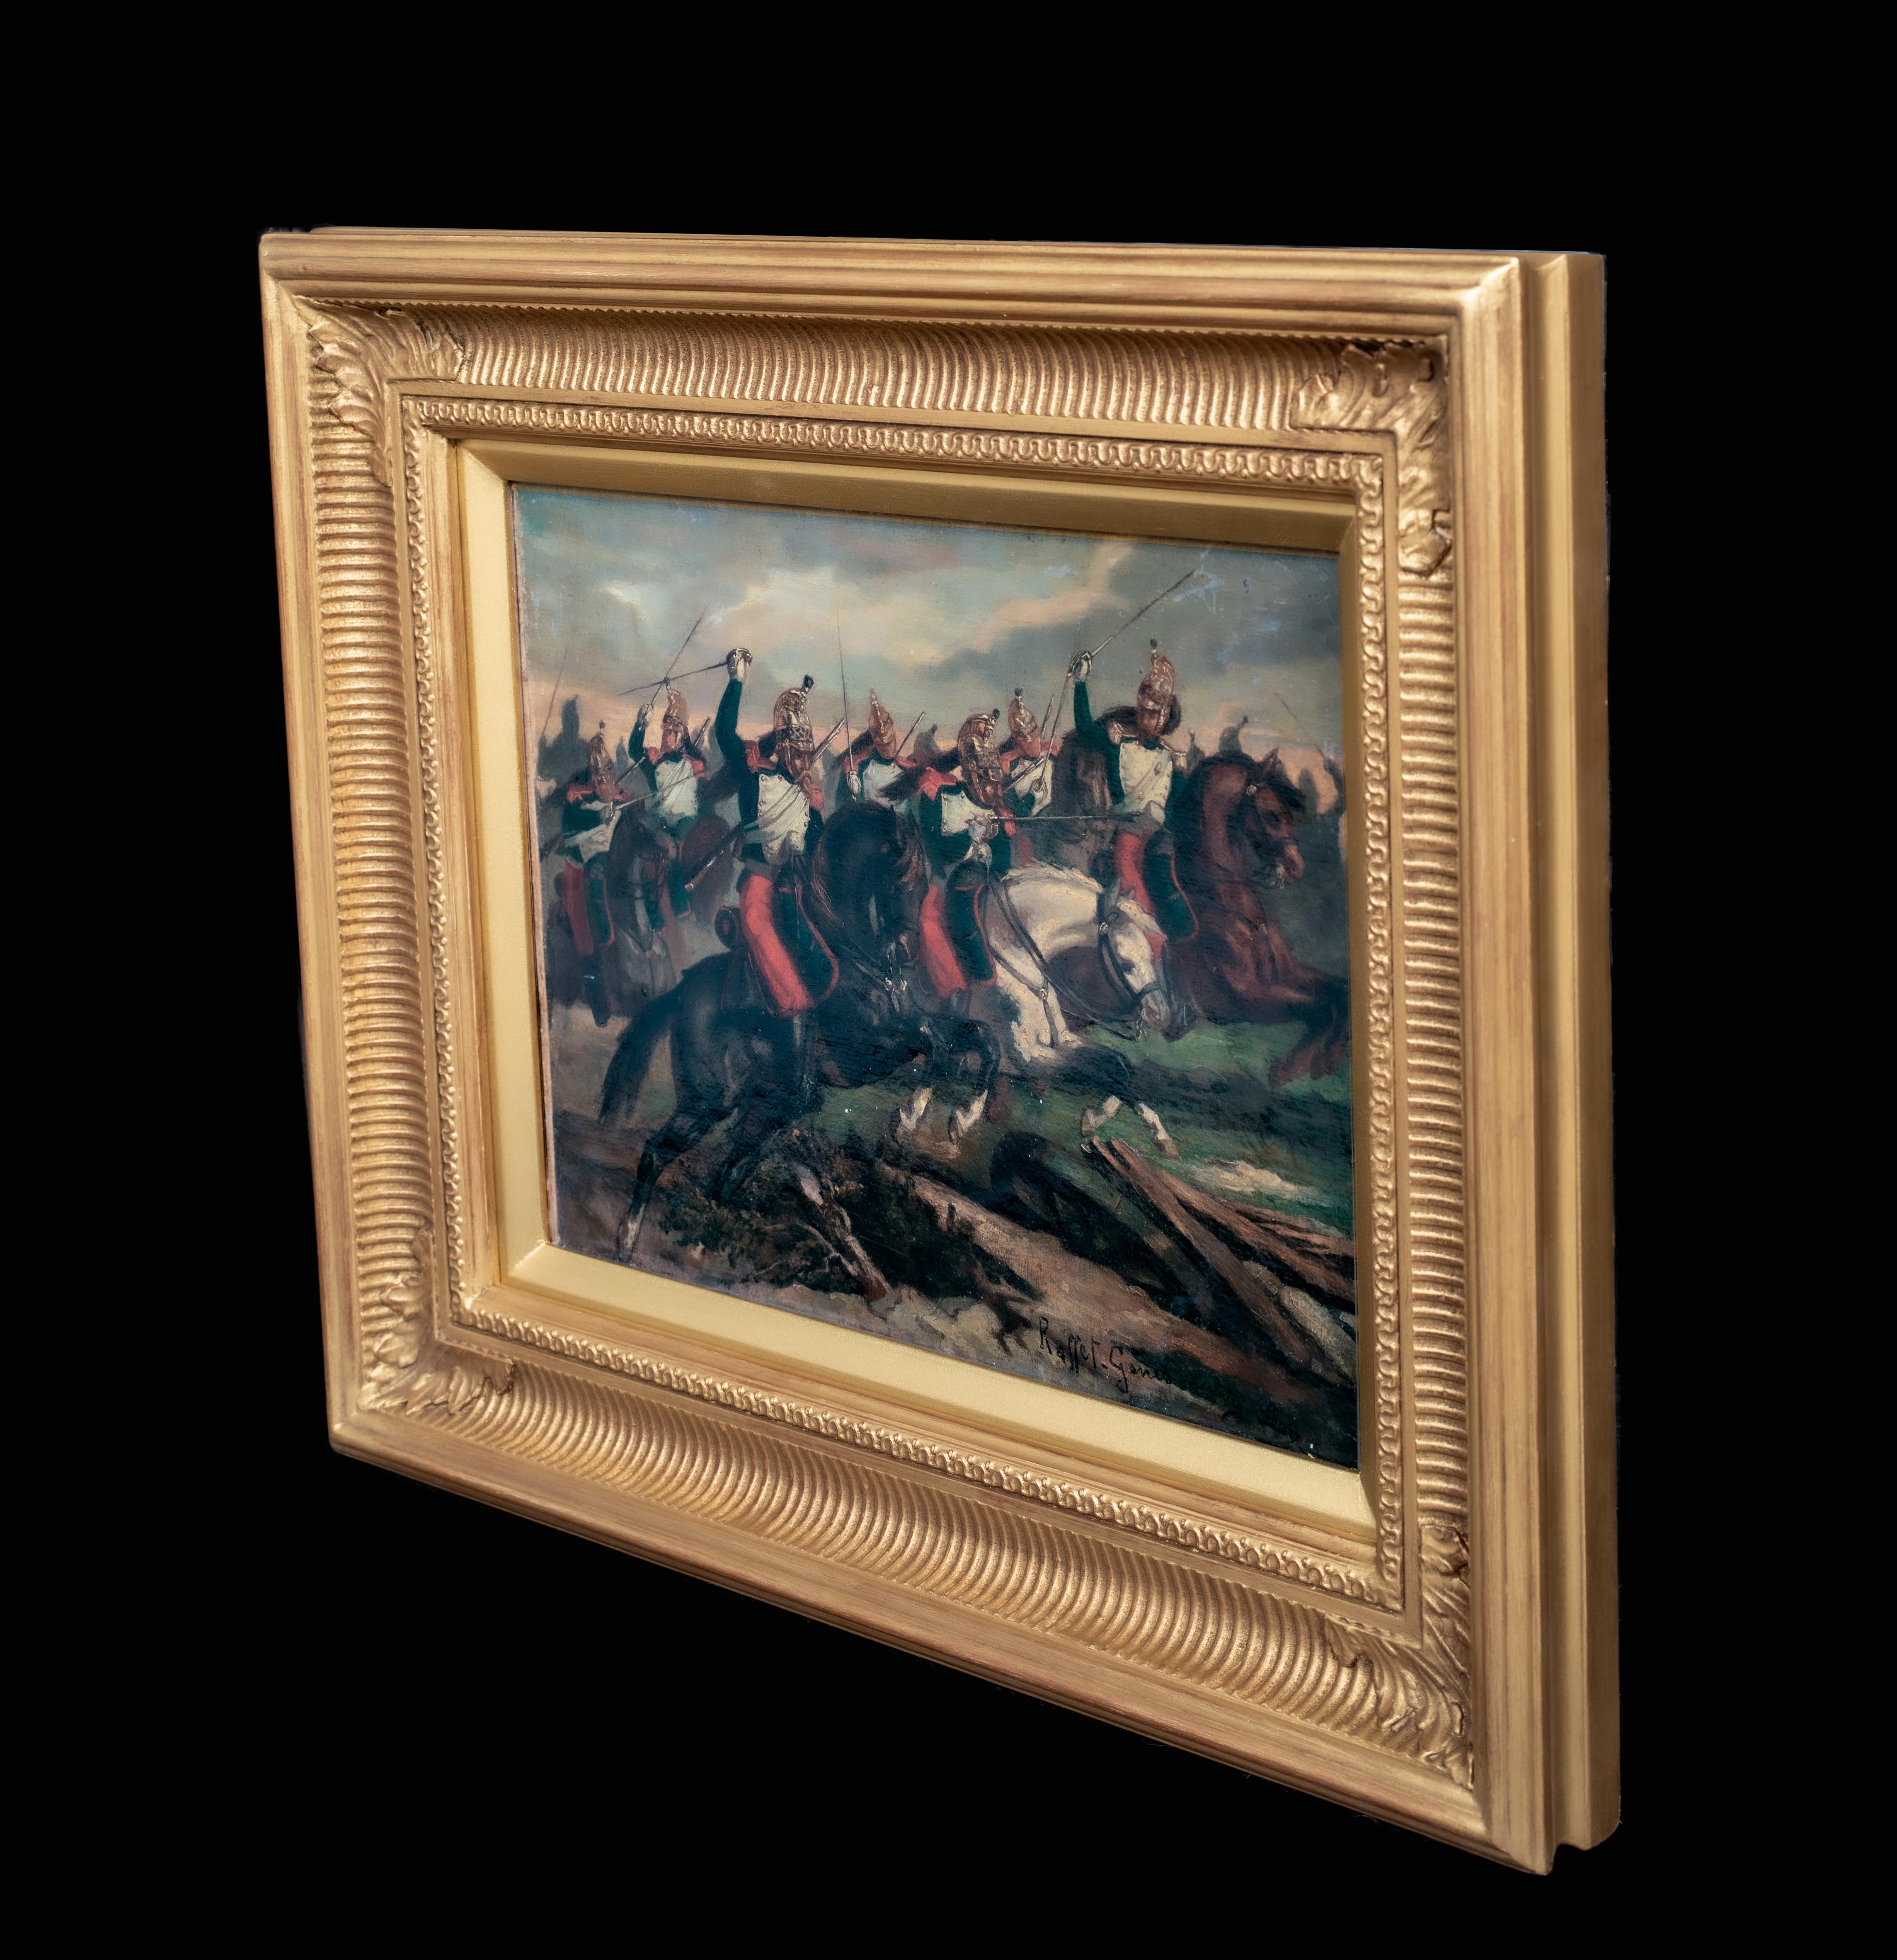 Charge Of the Cuirassiers At The Battle Of Waterloo 19th Century 

by AUGUSTE RAFFET (1804-1860) similar to $15,000

19th Century French scene of Napoleons Cuirassiers charging at the Battle Of Waterloo, oil on canvas by Auguste Raffet. Excellent